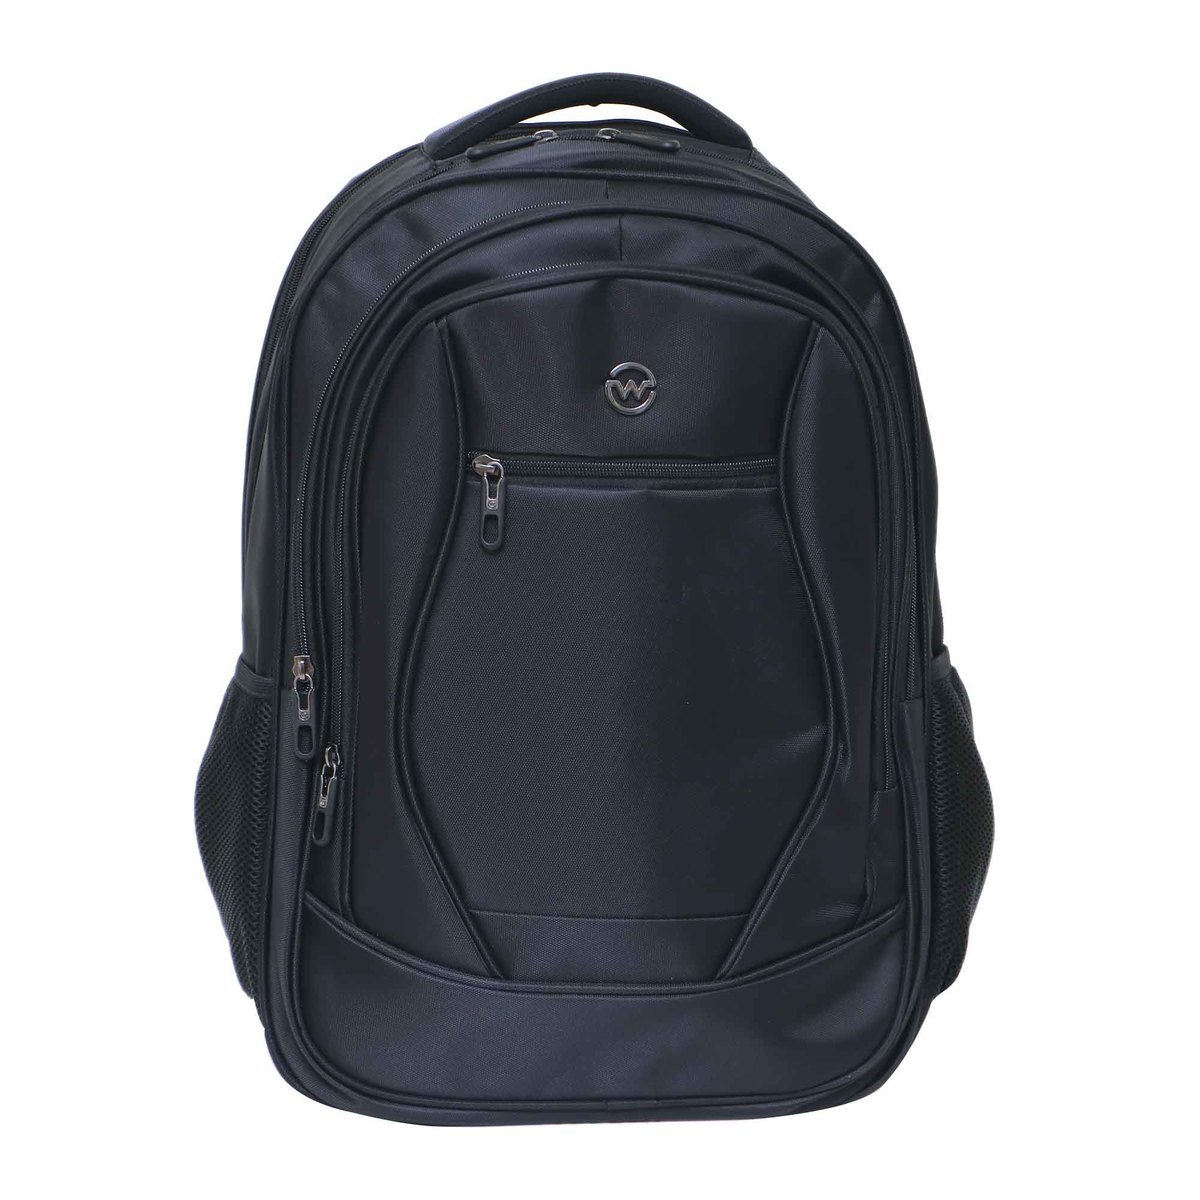 Wagon-R Multi Backpack 19inch 7820-2 Assorted